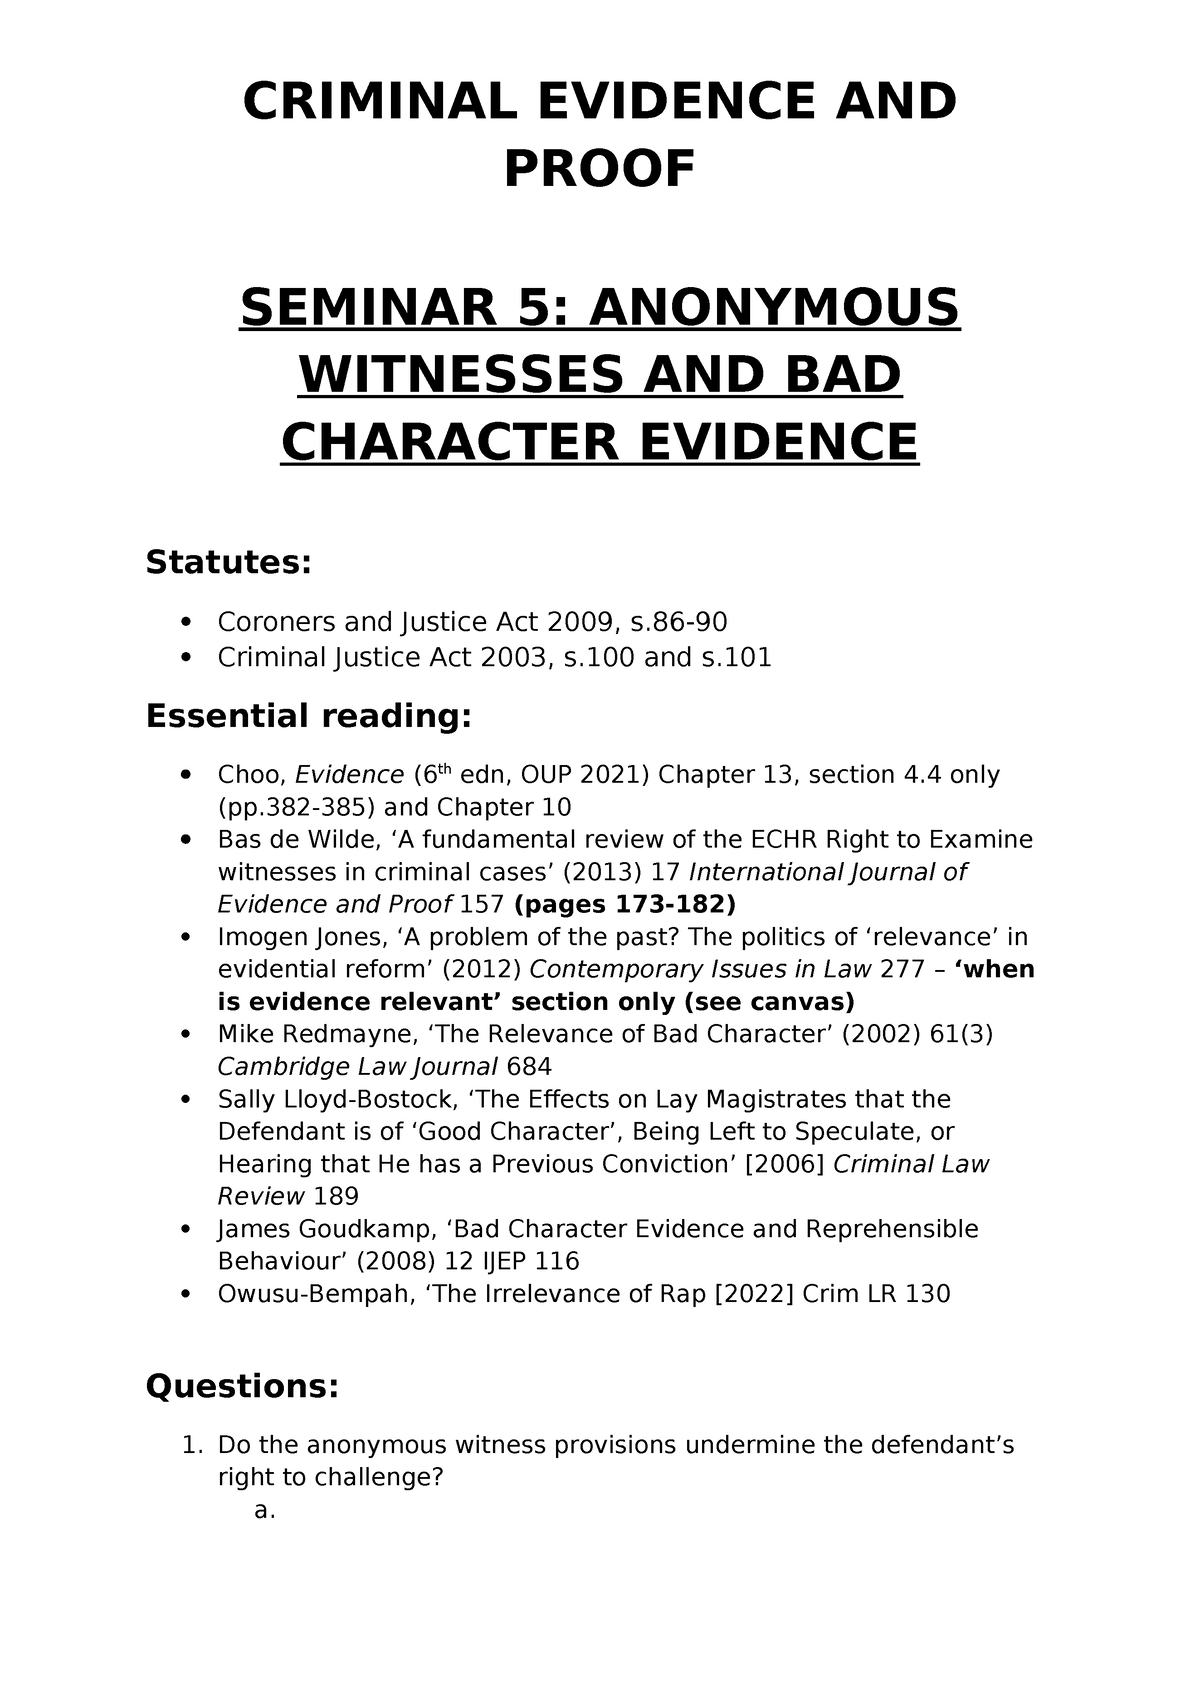 bad character evidence dissertation